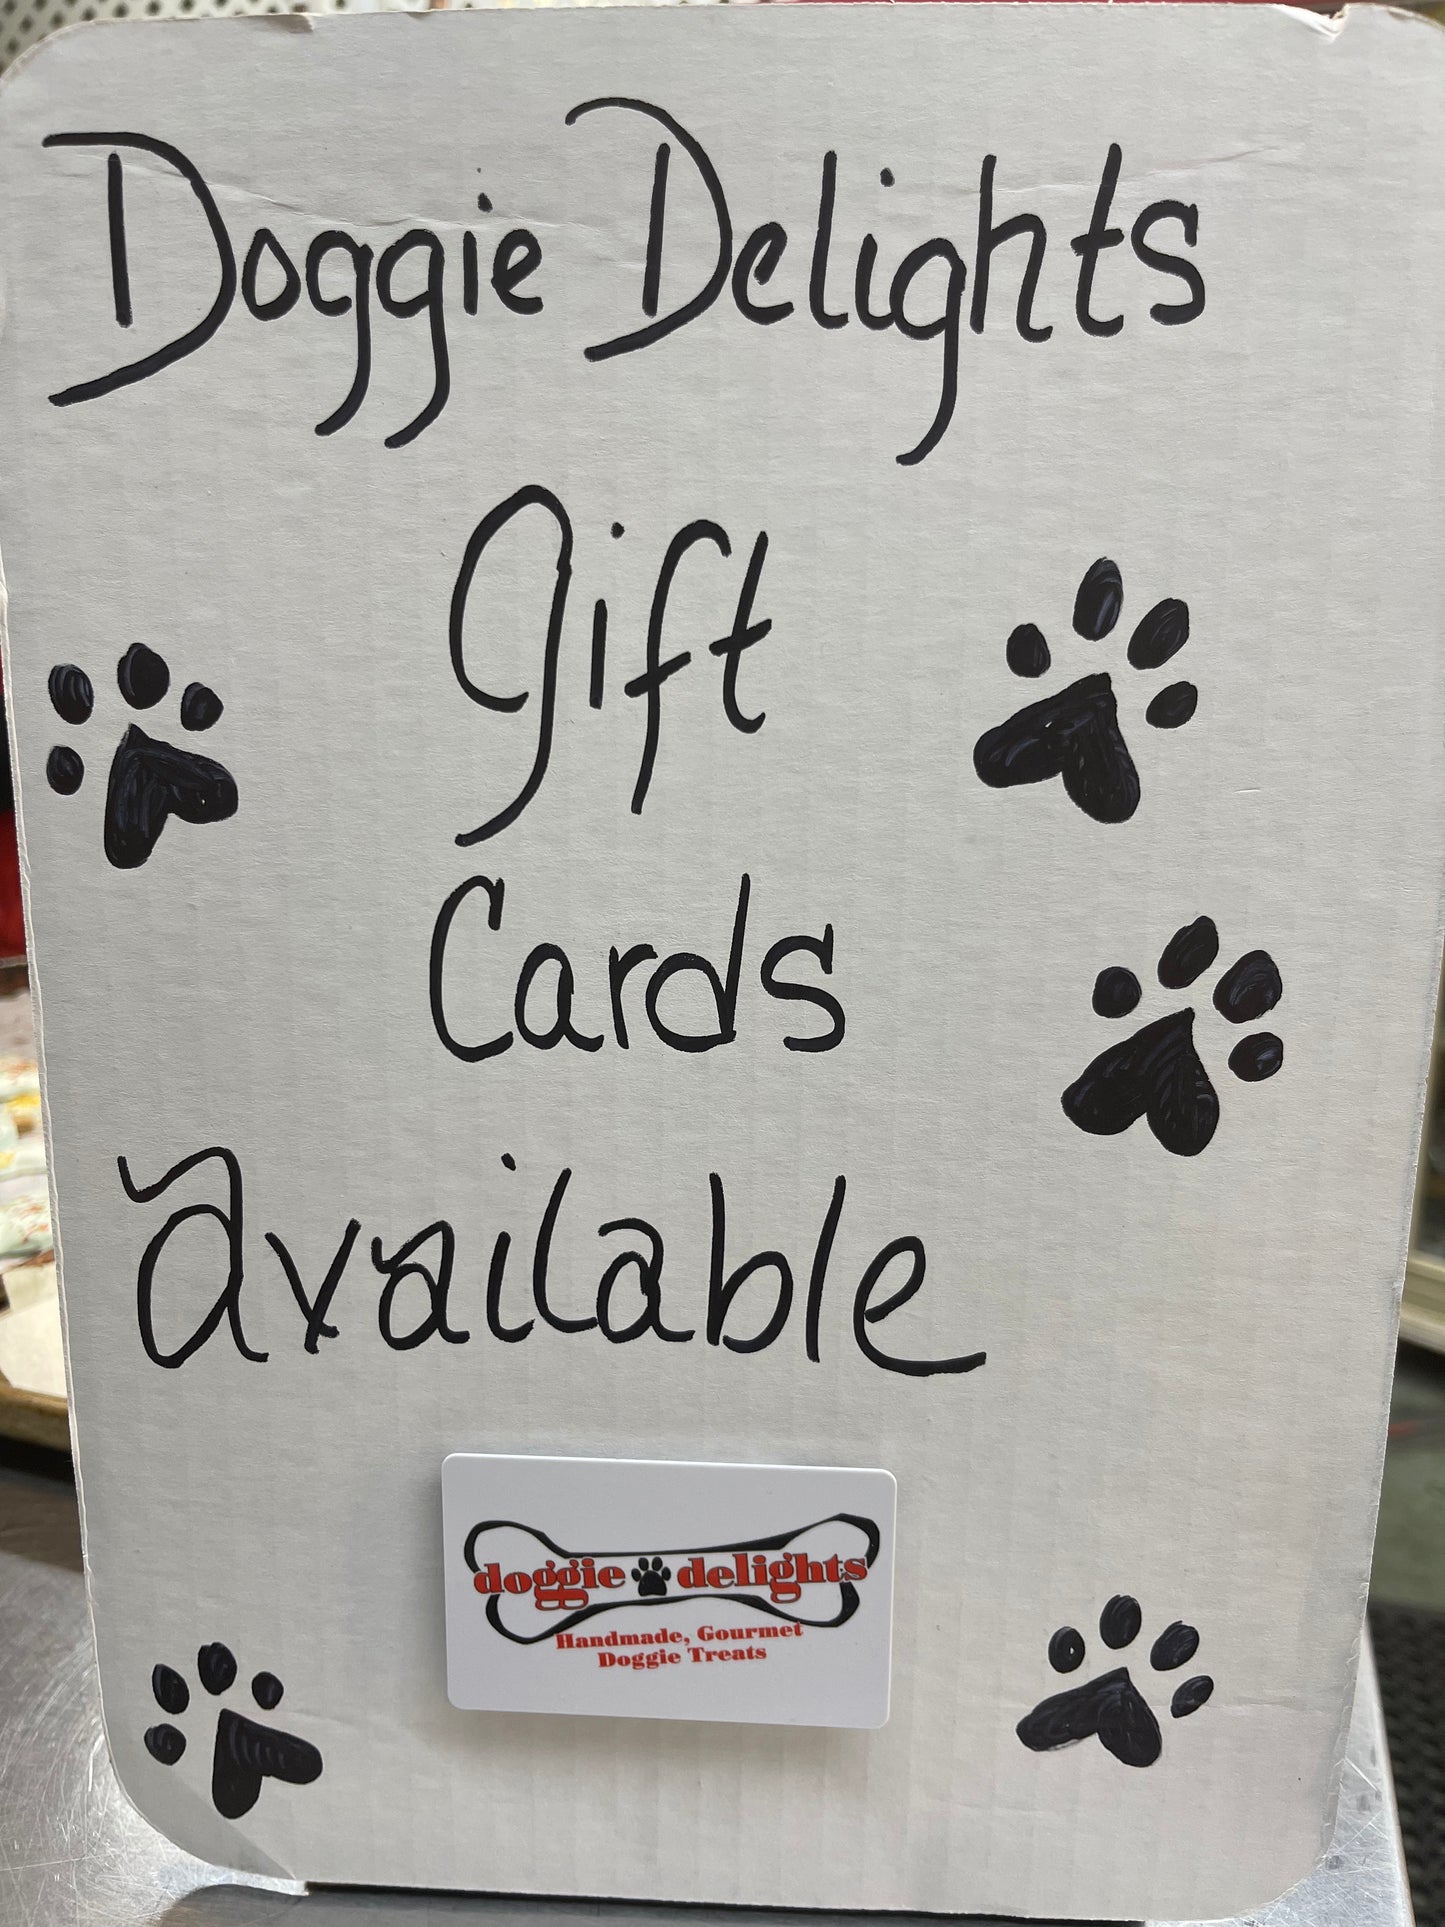 Doggie Delights Gift Card